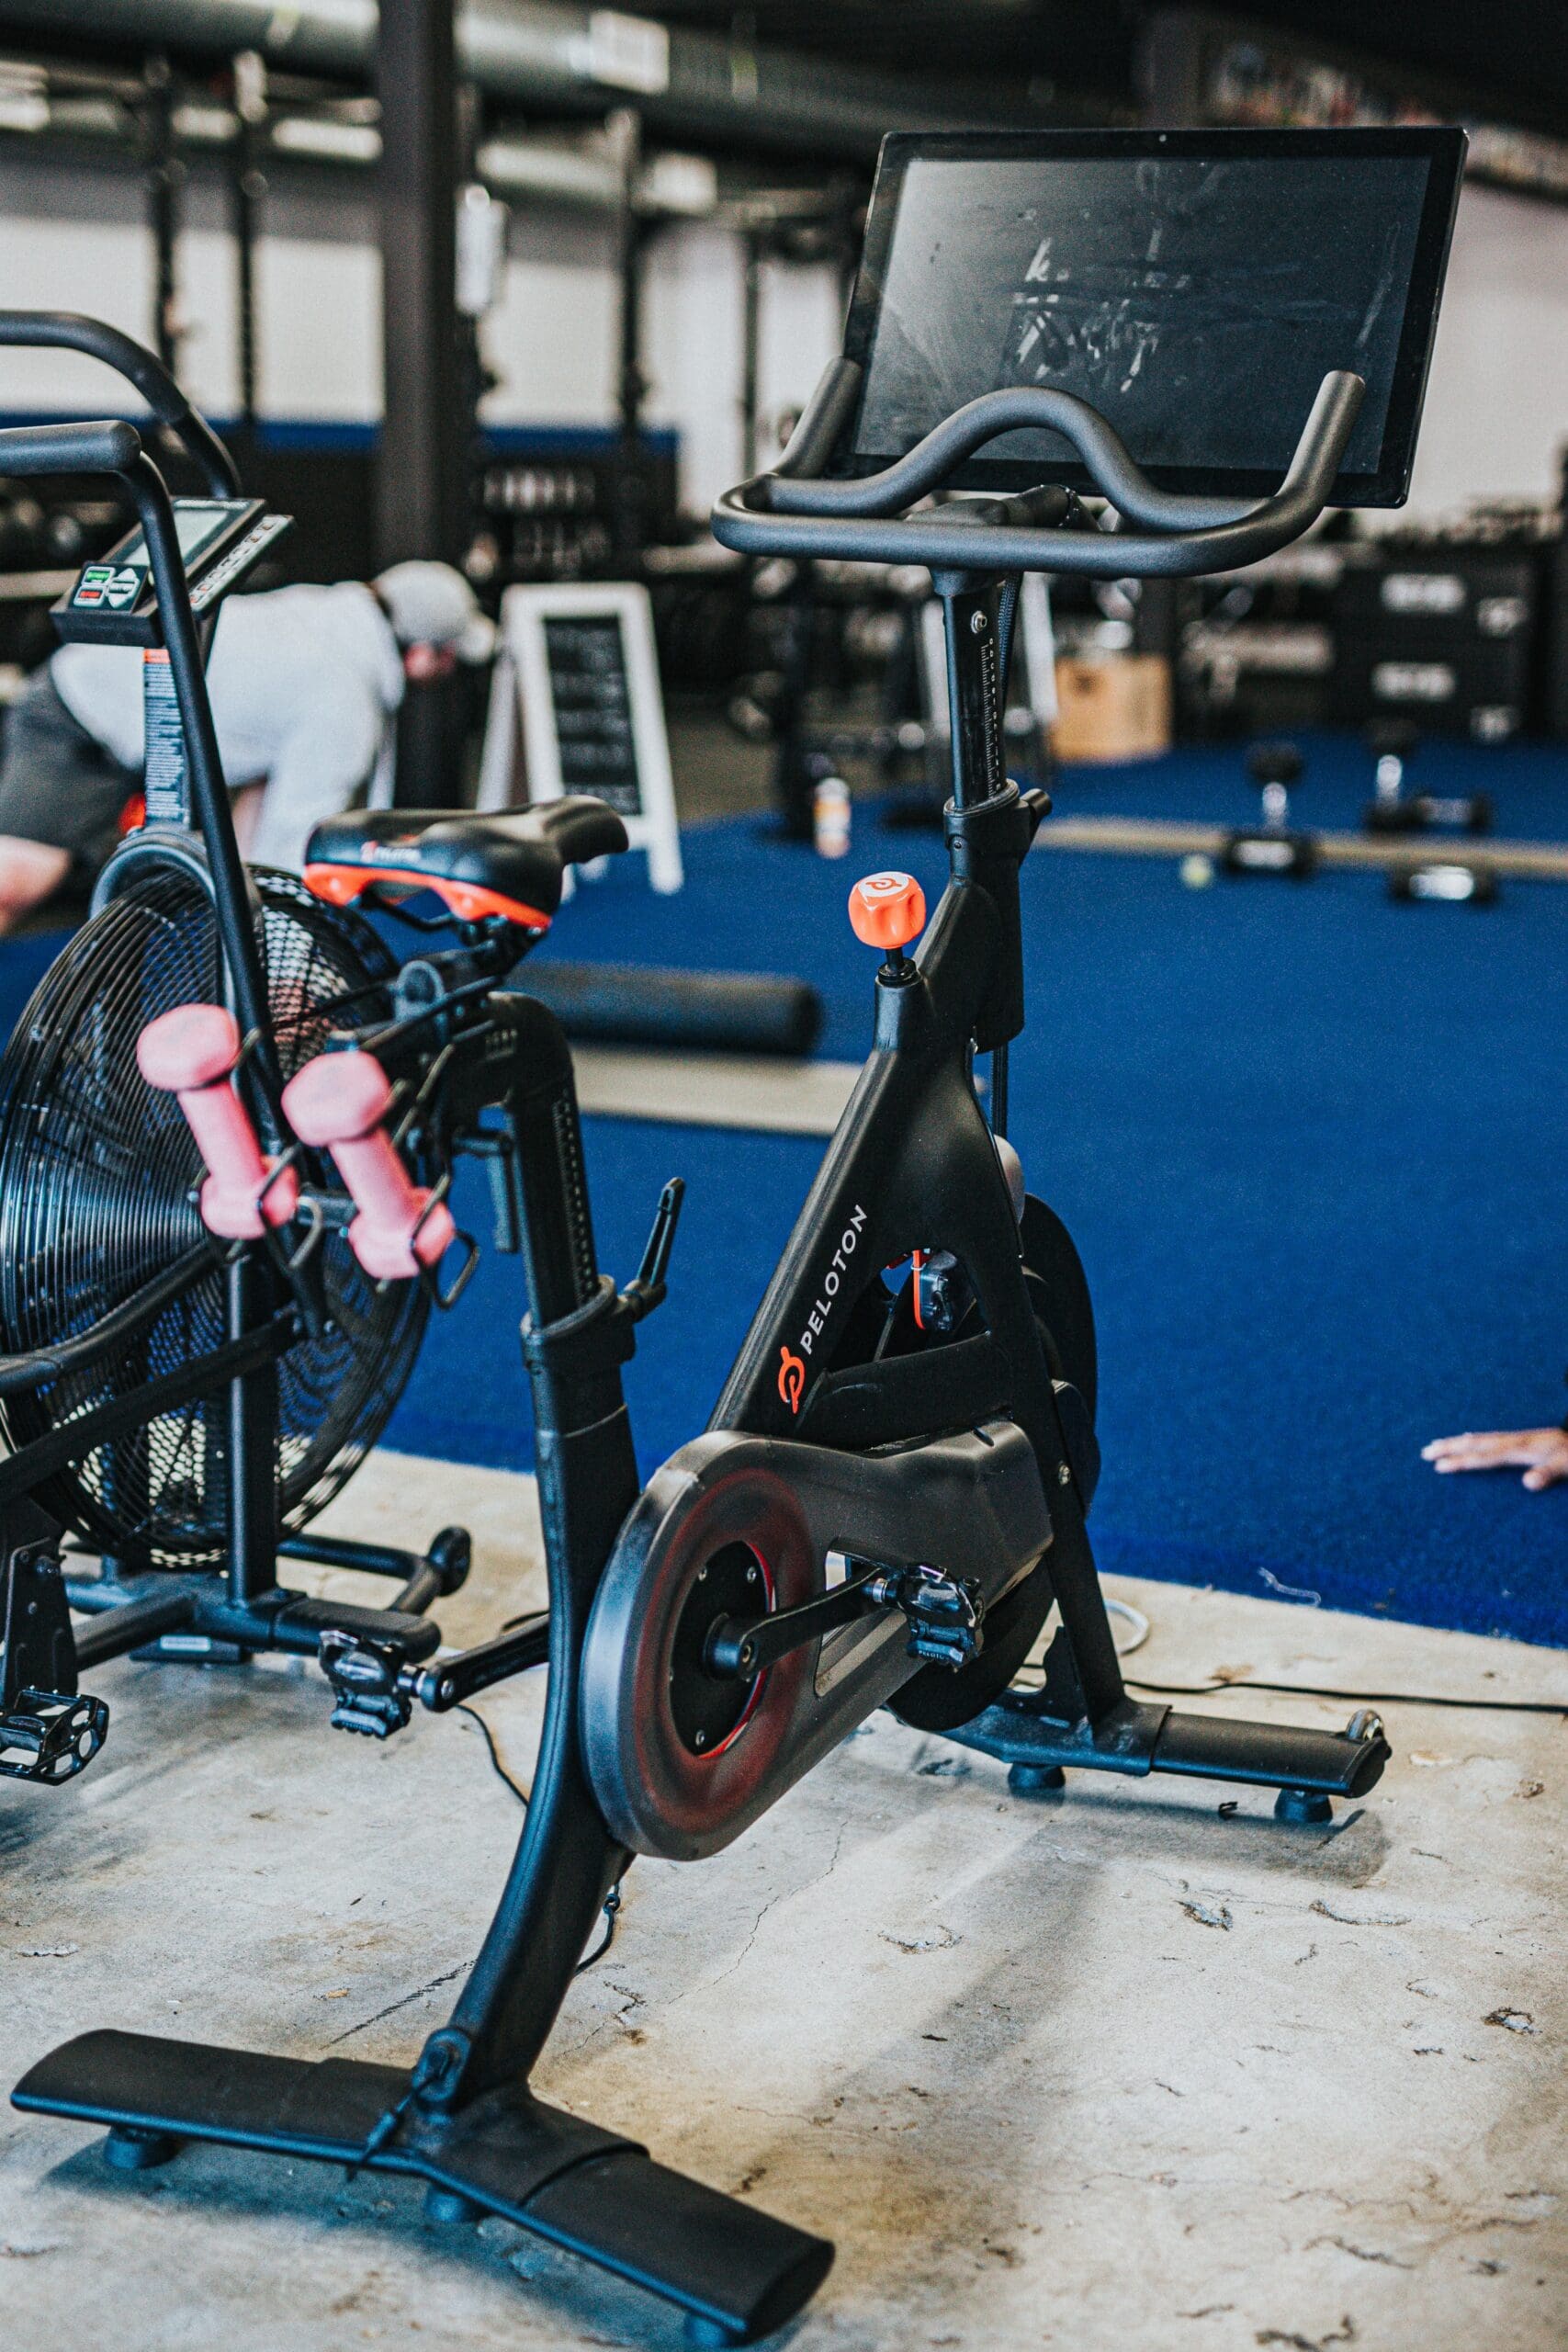 Are Exercise Bikes Good for Weight Loss?